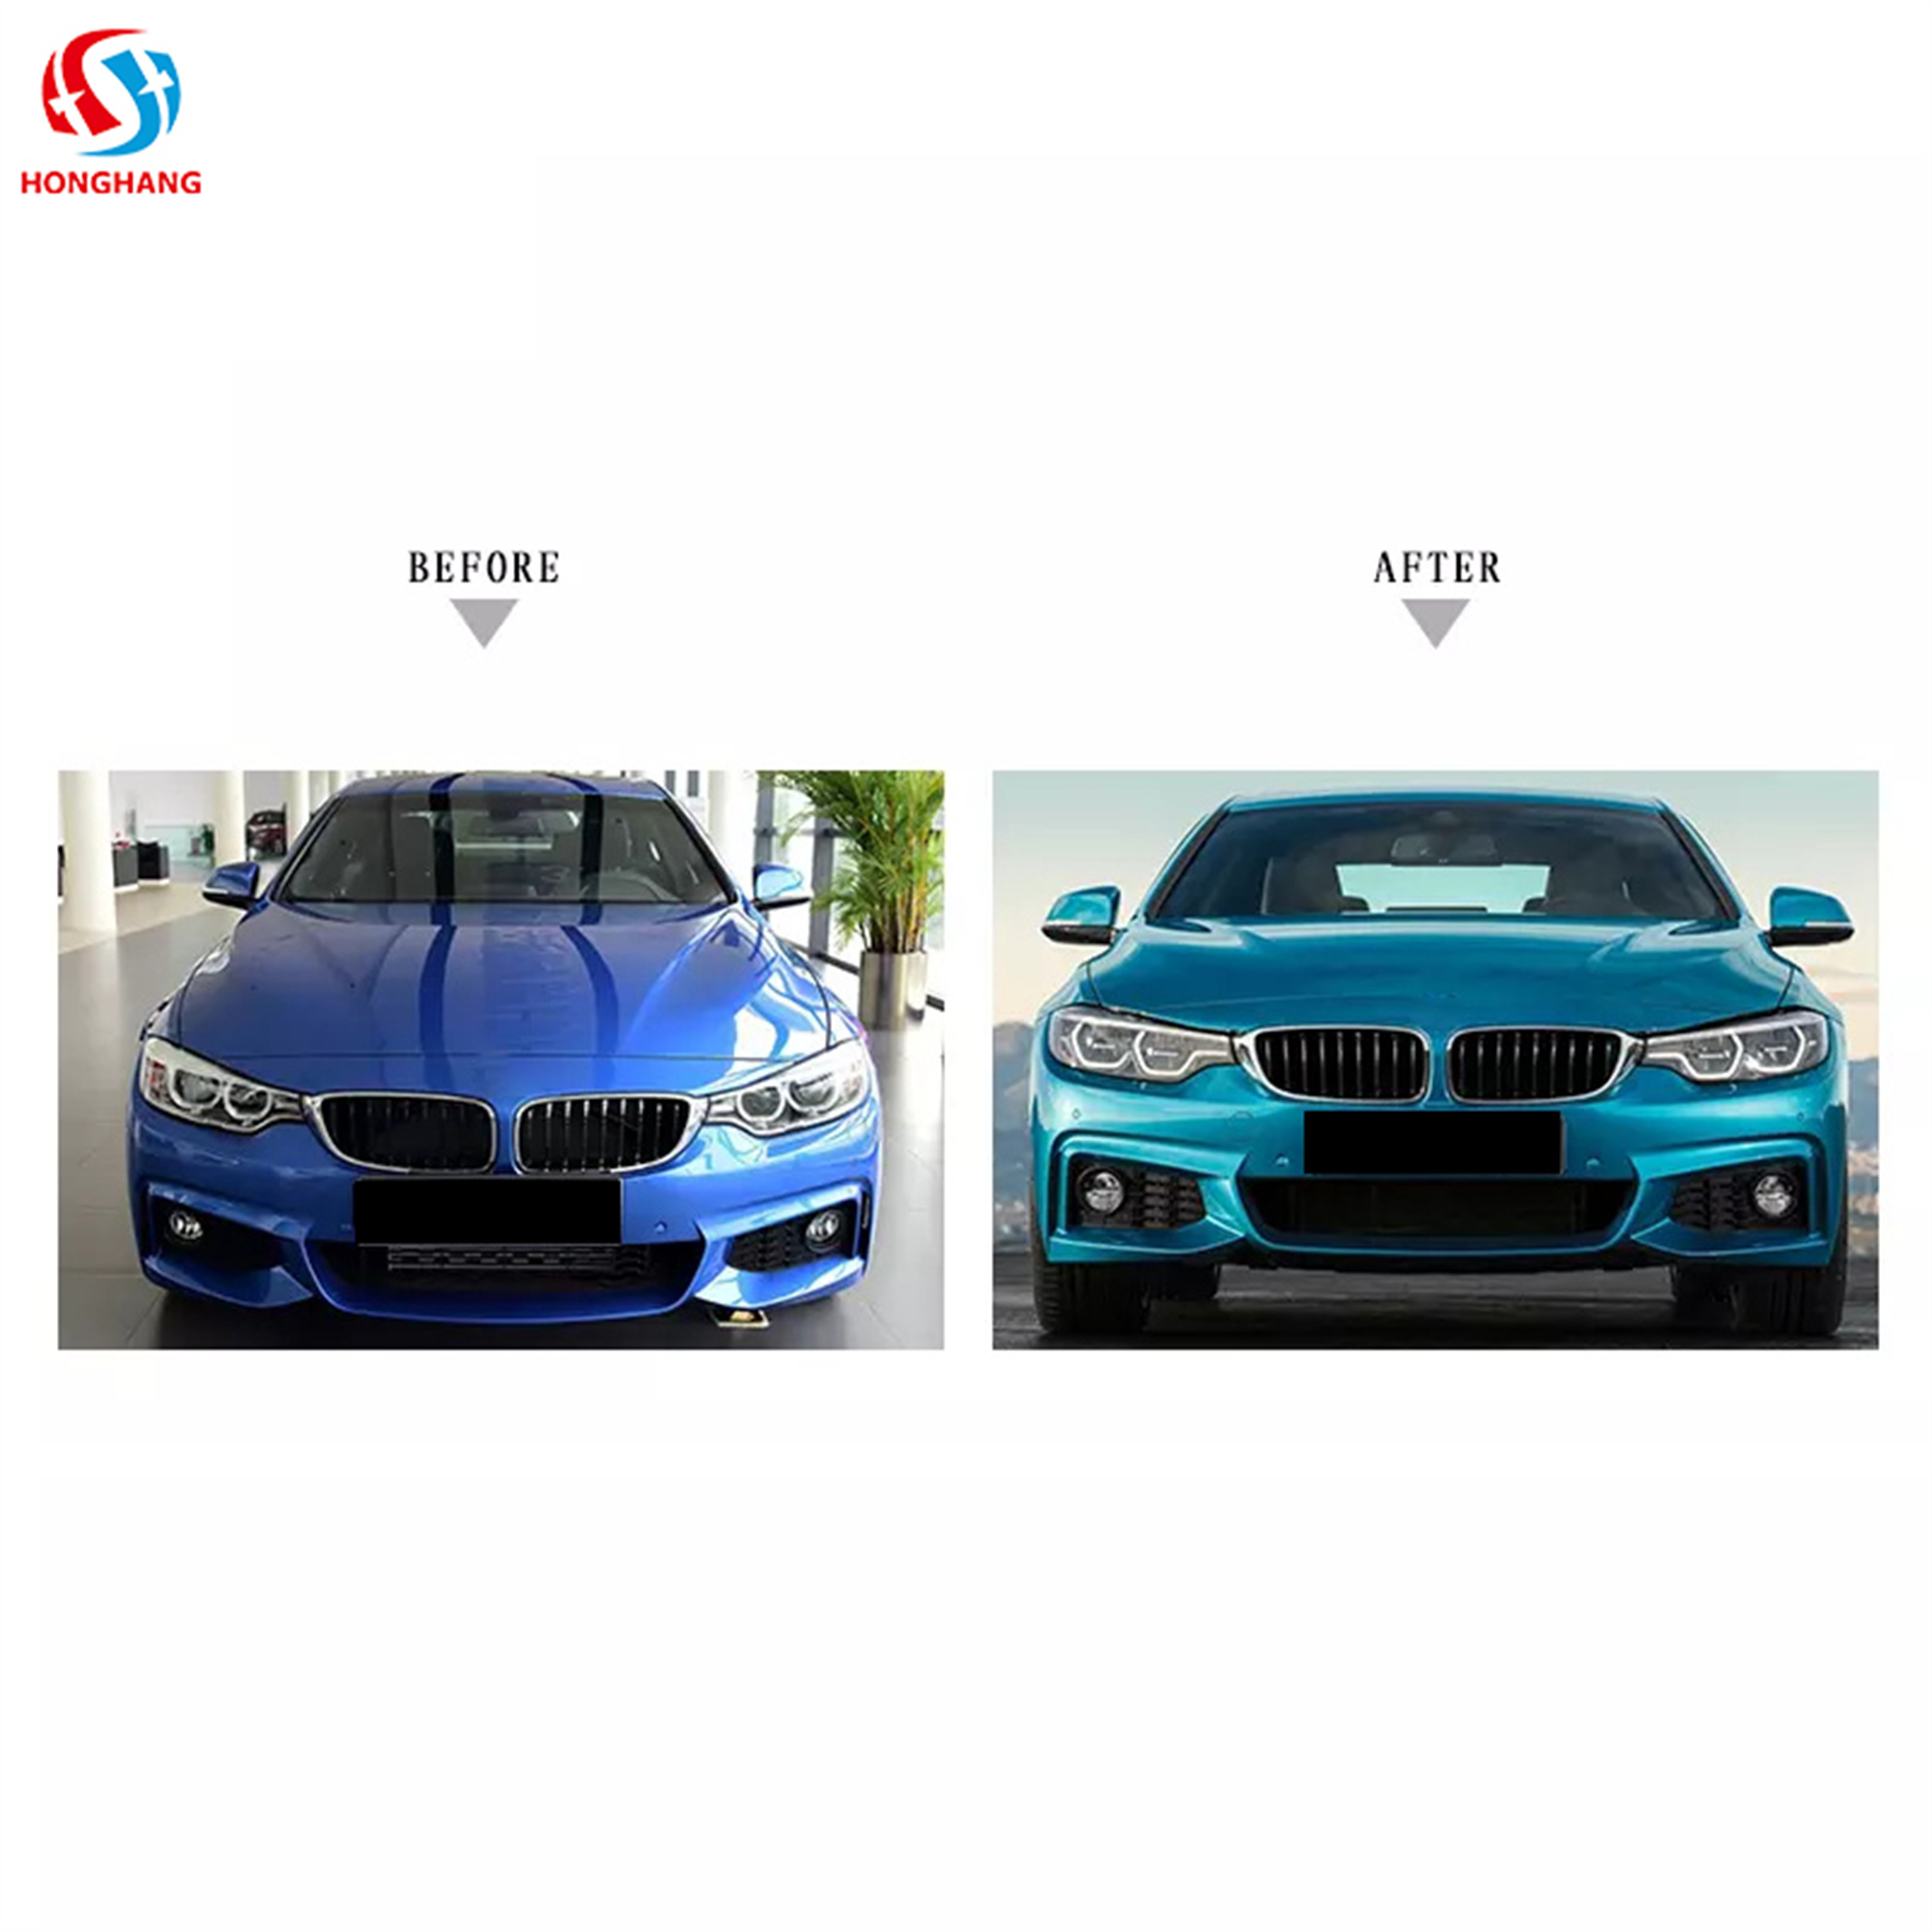 M-tech Style Body Kit for Bmw 4 Series F32 F36 2014-2017